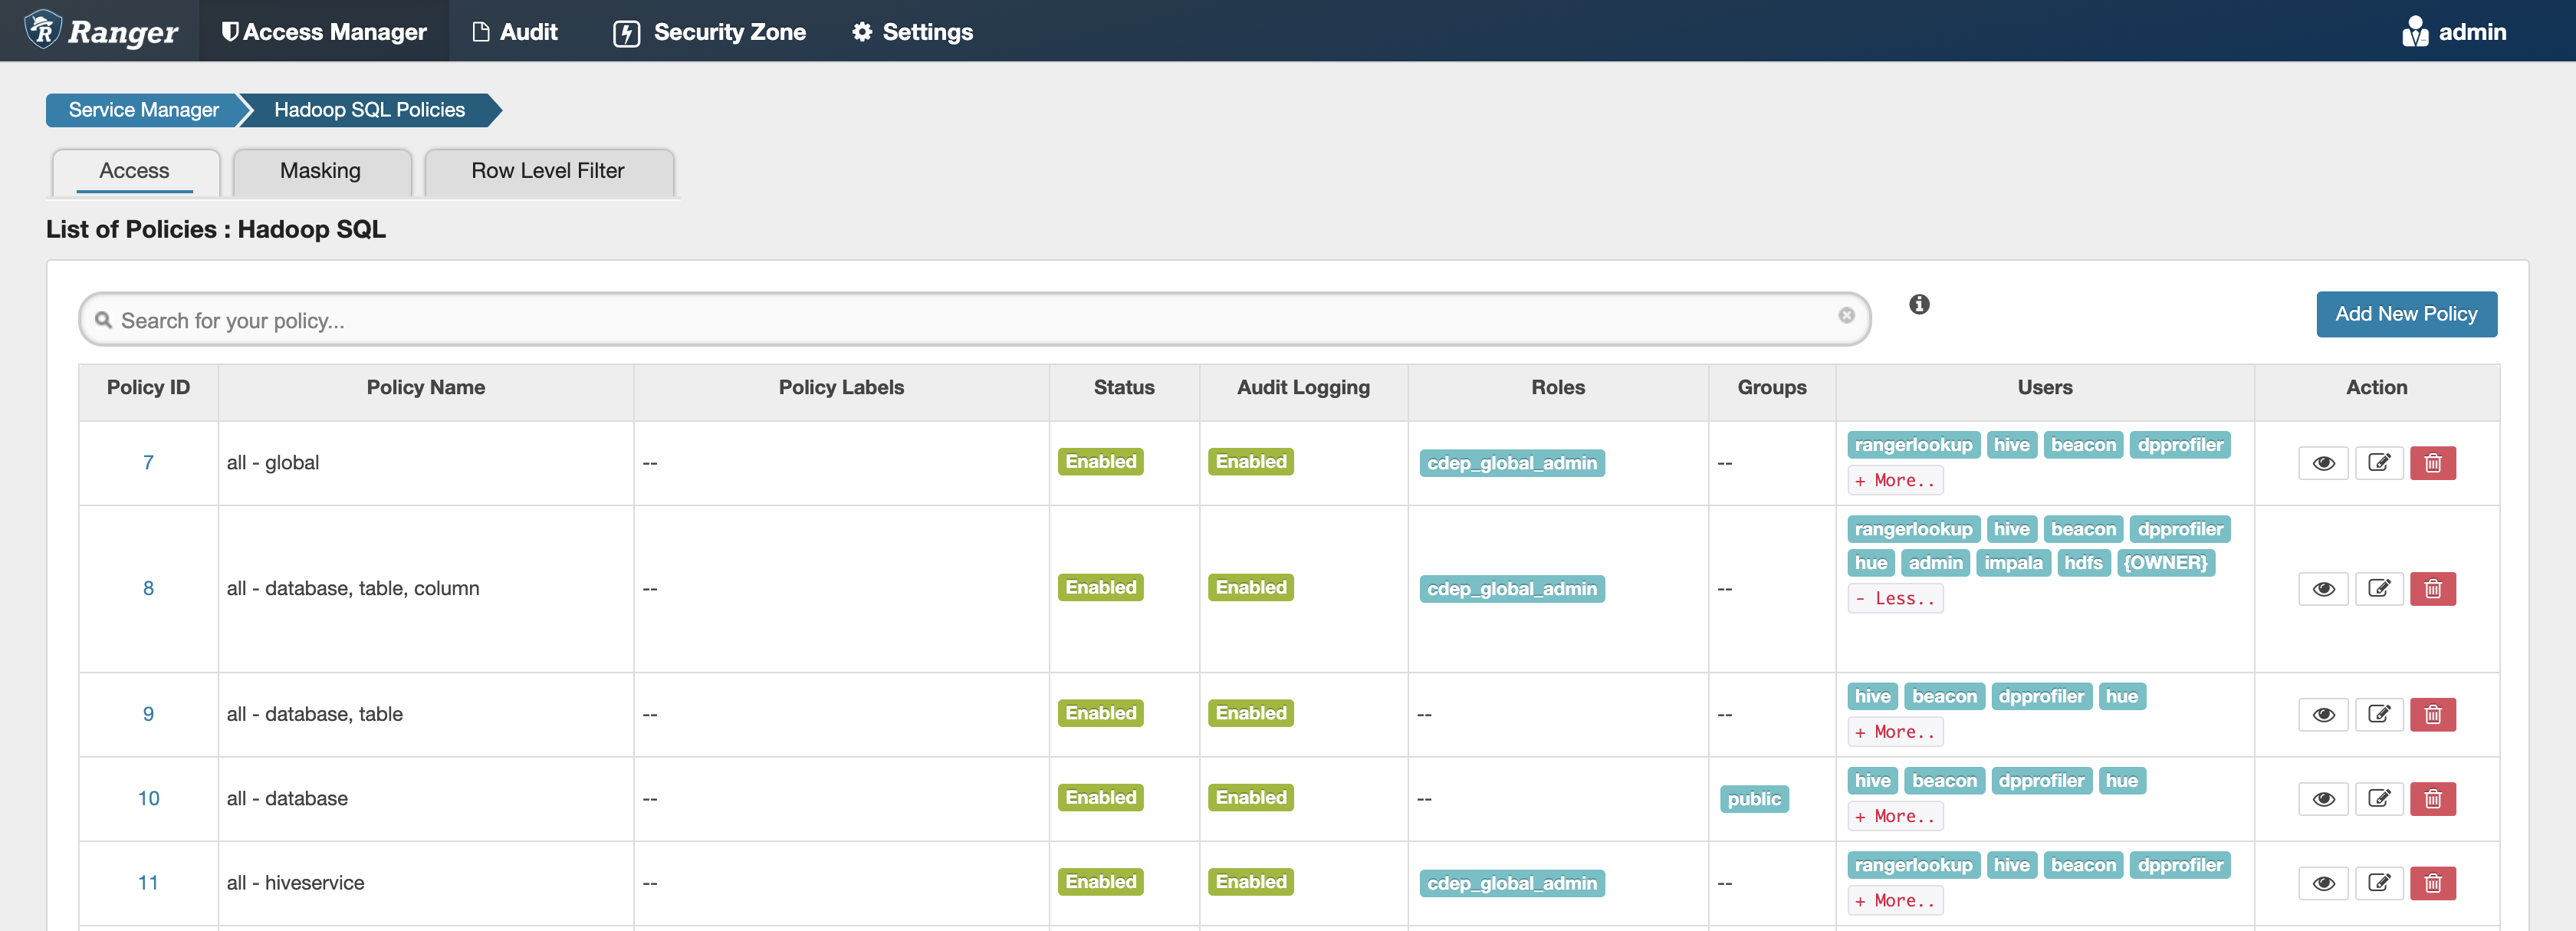 The sample image shows the Hadoop SQL section in Ranger UI where you can assign user permissions using policies.